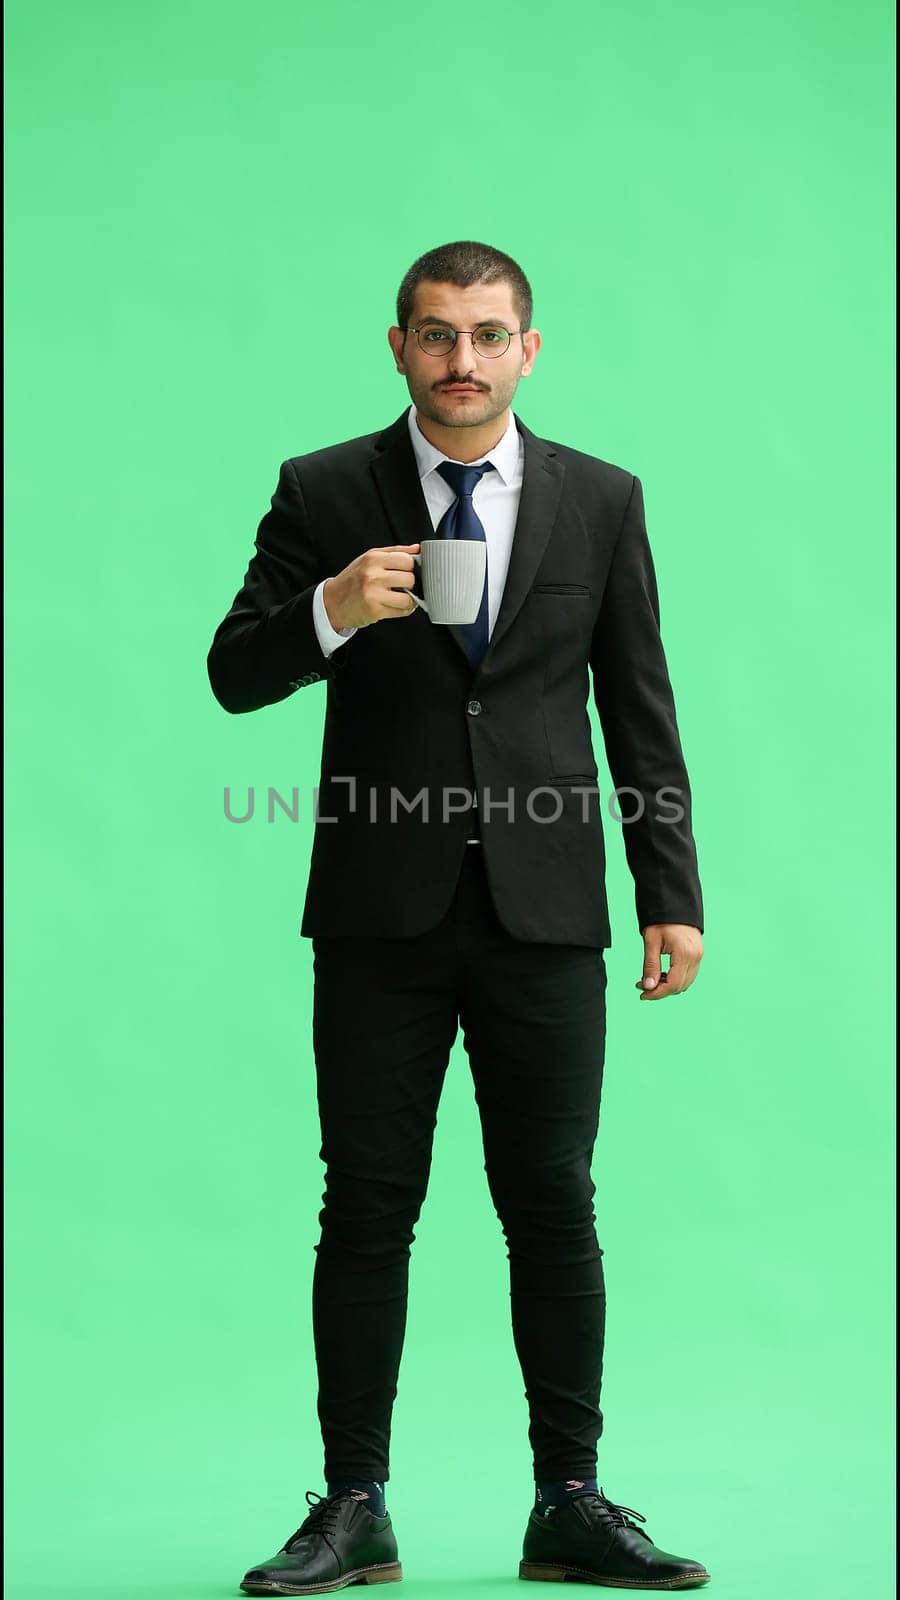 young man in full growth. isolated on green background. holding a mug of coffee.